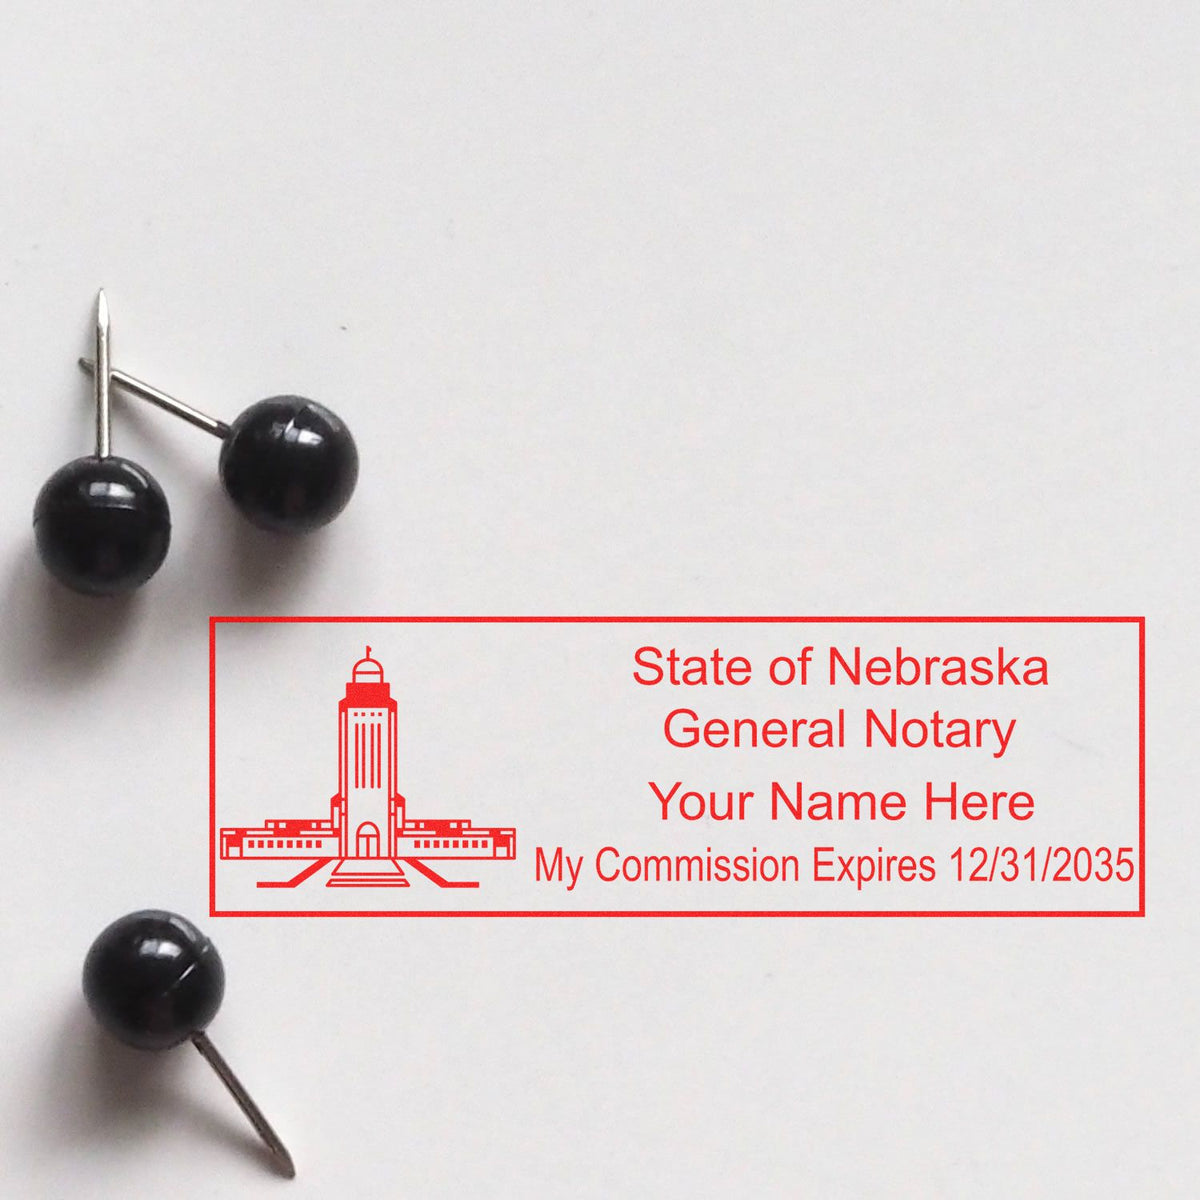 The Self-Inking State Seal Nebraska Notary Stamp stamp impression comes to life with a crisp, detailed photo on paper - showcasing true professional quality.